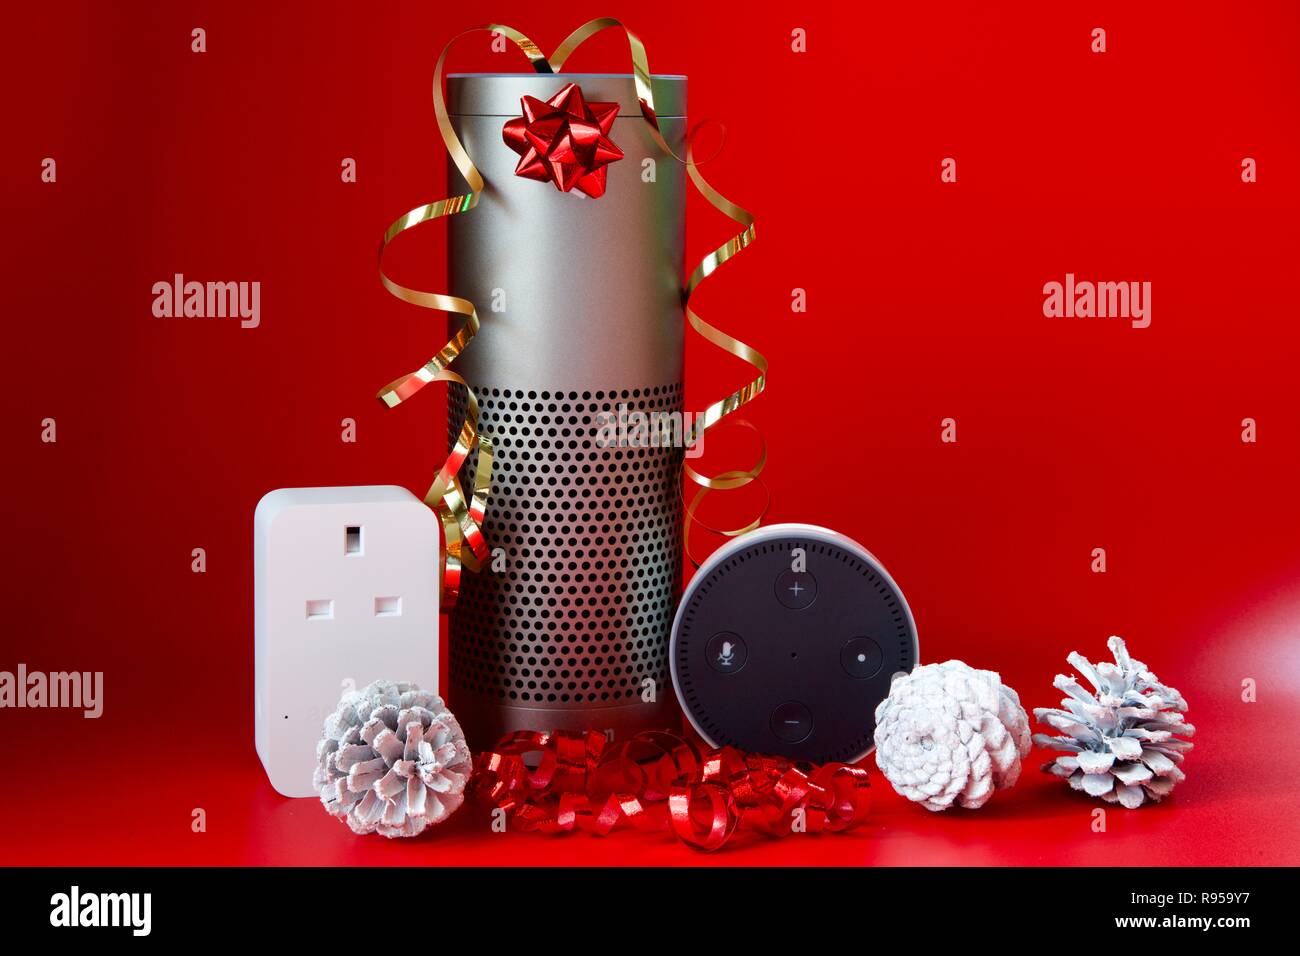 Amazon Echo, Echo Dot and Smart Plug with Christmas decorations on a red background Stock Photo